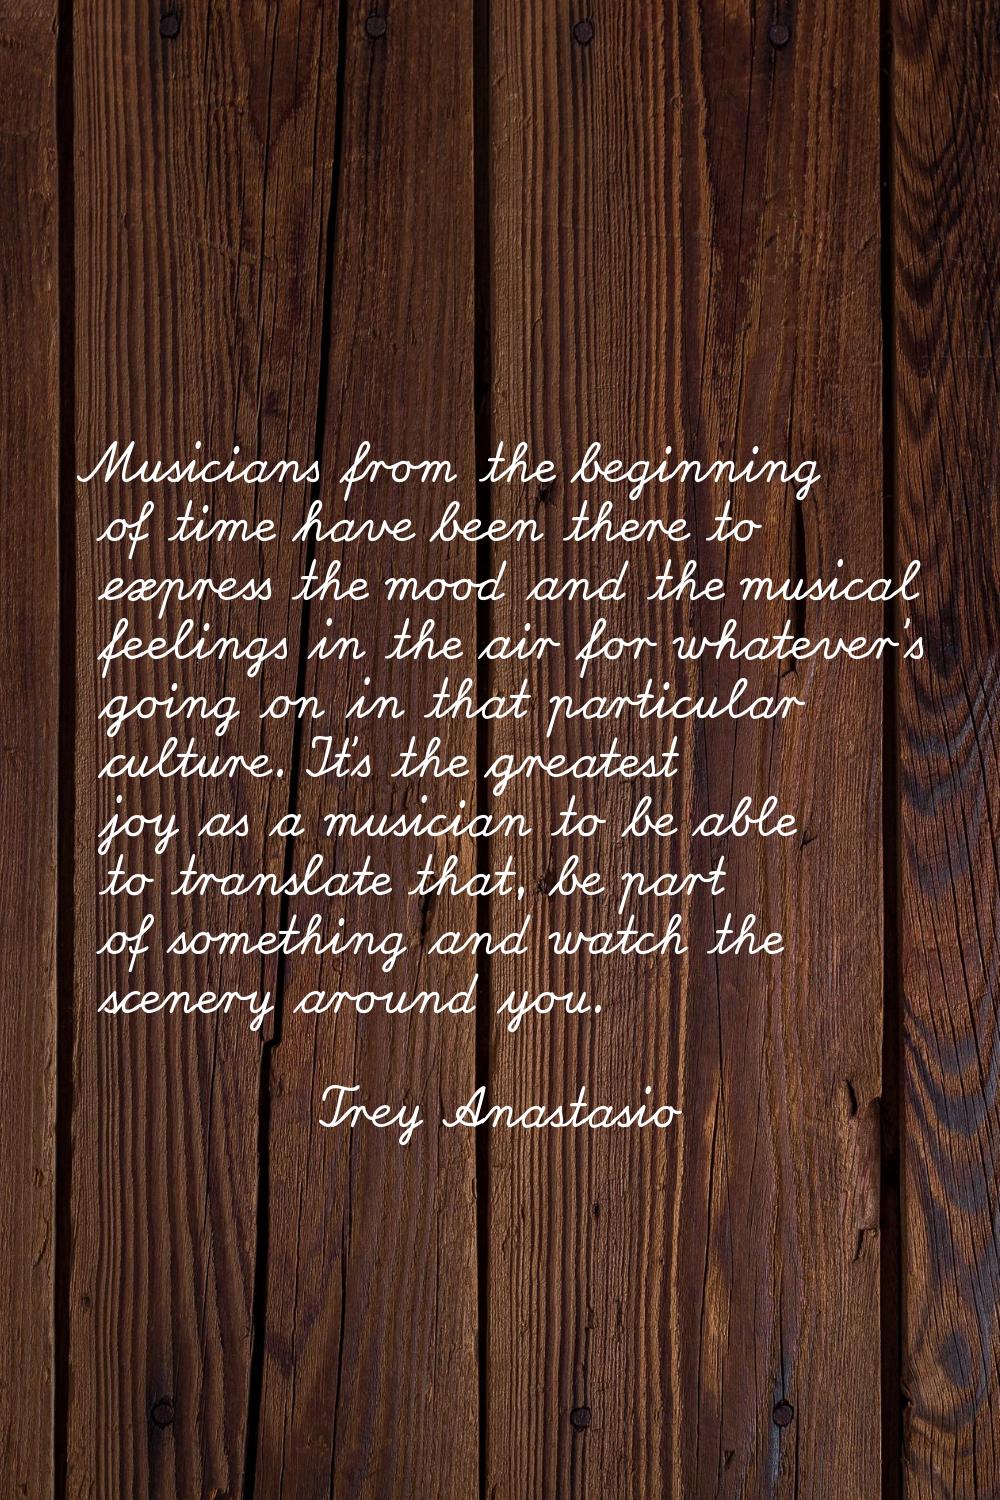 Musicians from the beginning of time have been there to express the mood and the musical feelings i